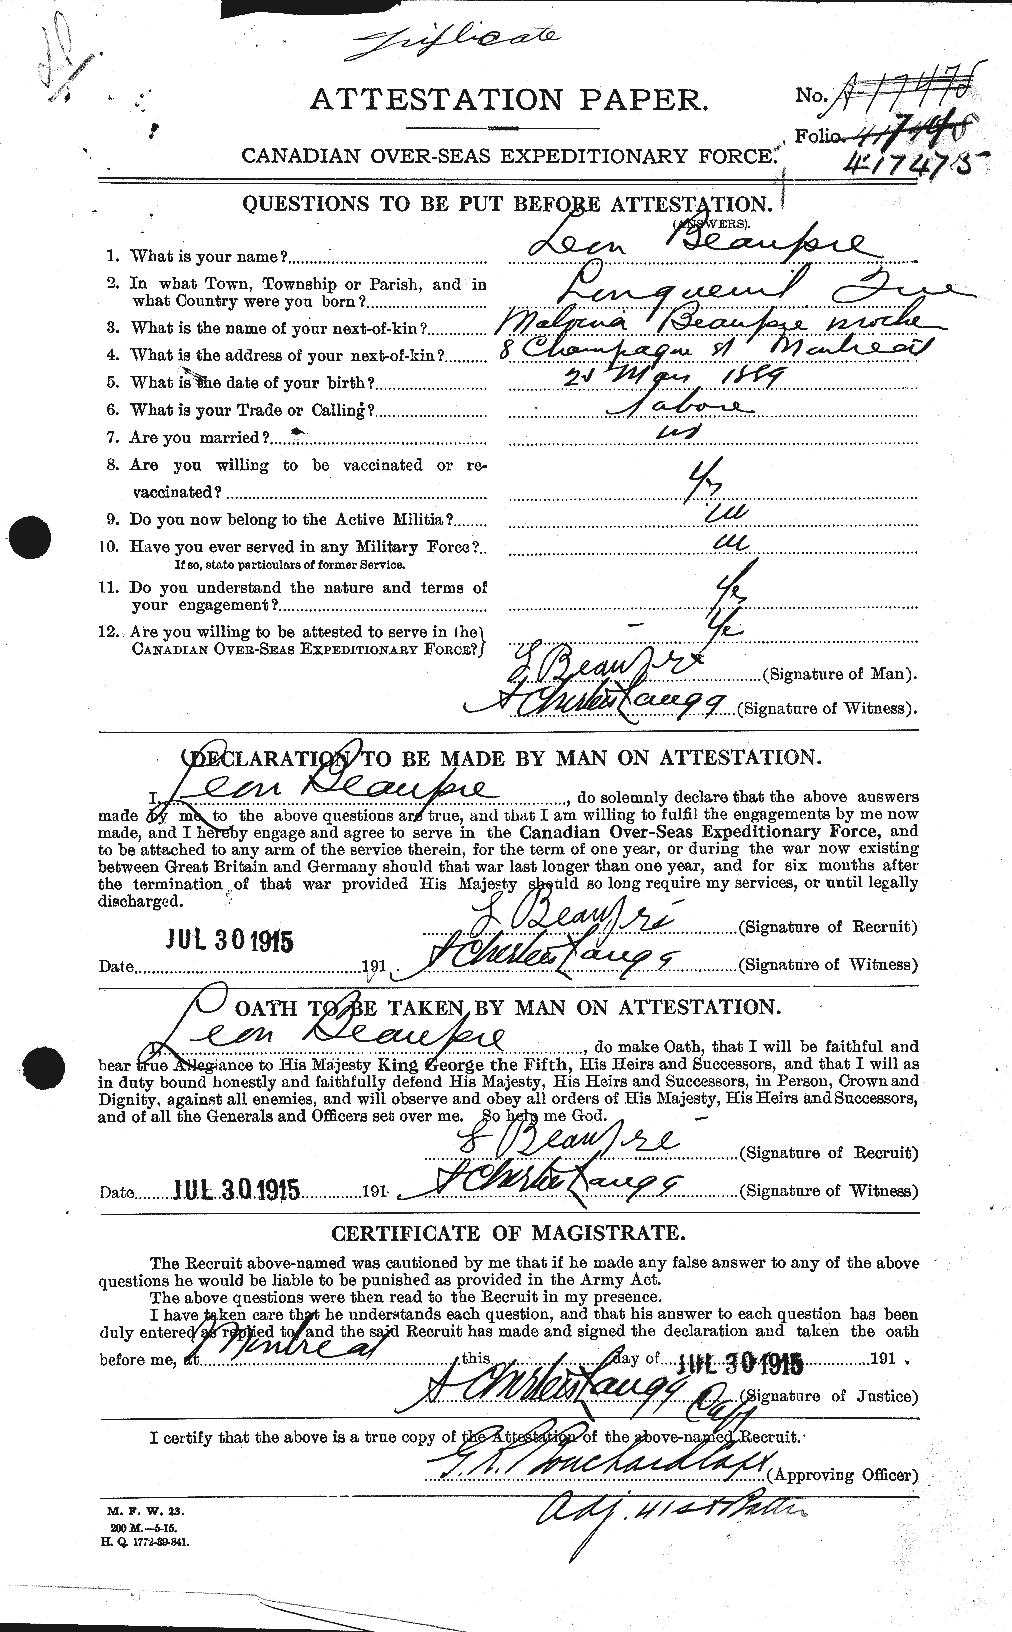 Personnel Records of the First World War - CEF 231766a